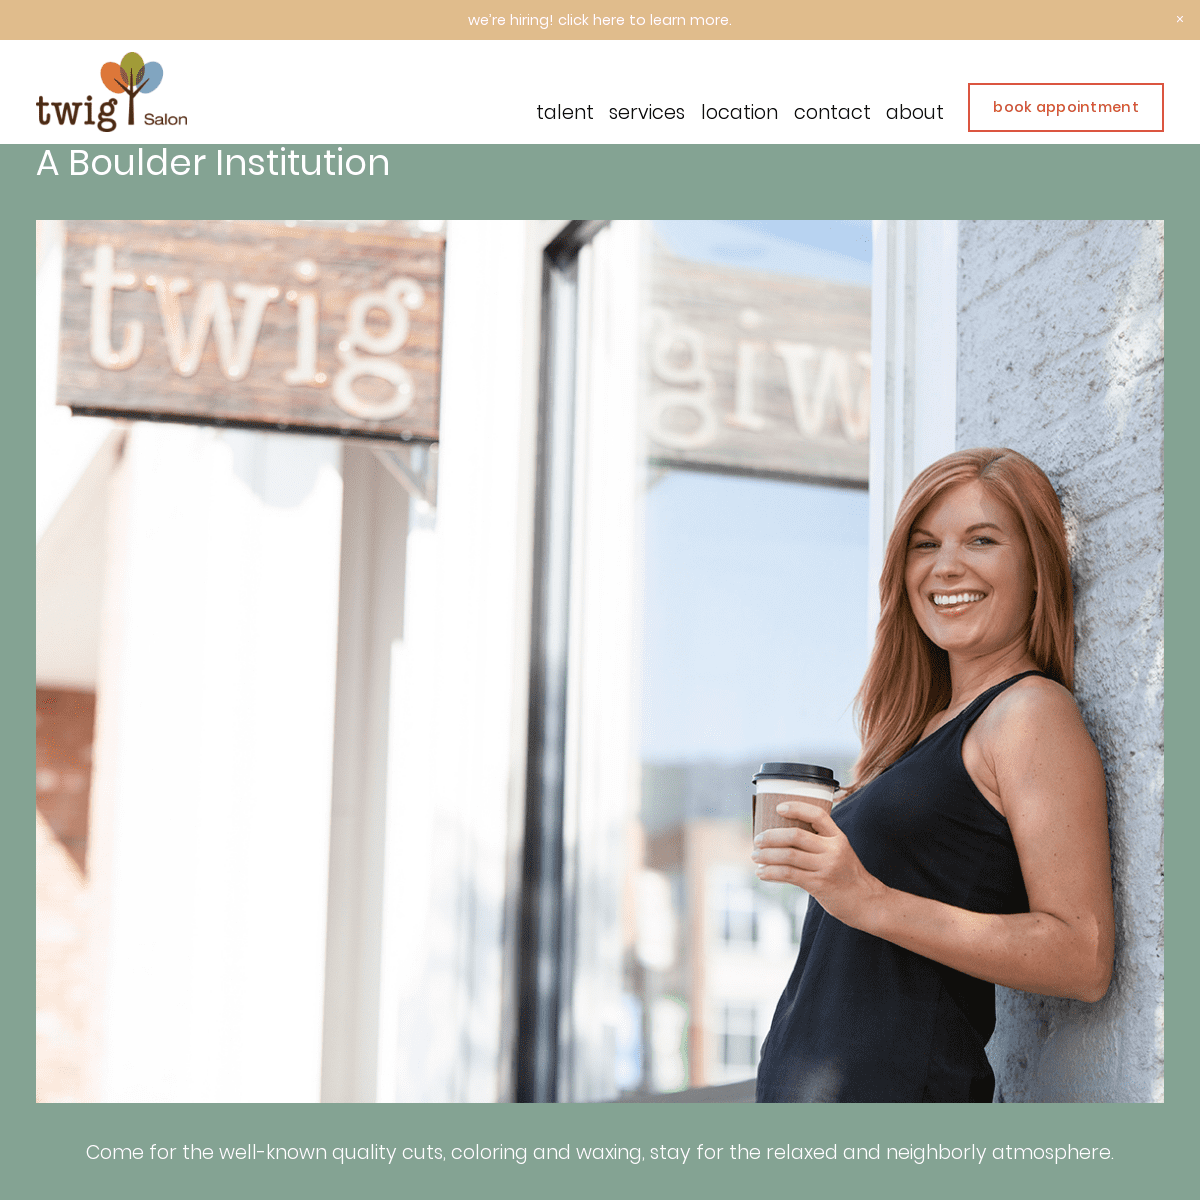 A complete backup of twighairsalon.com